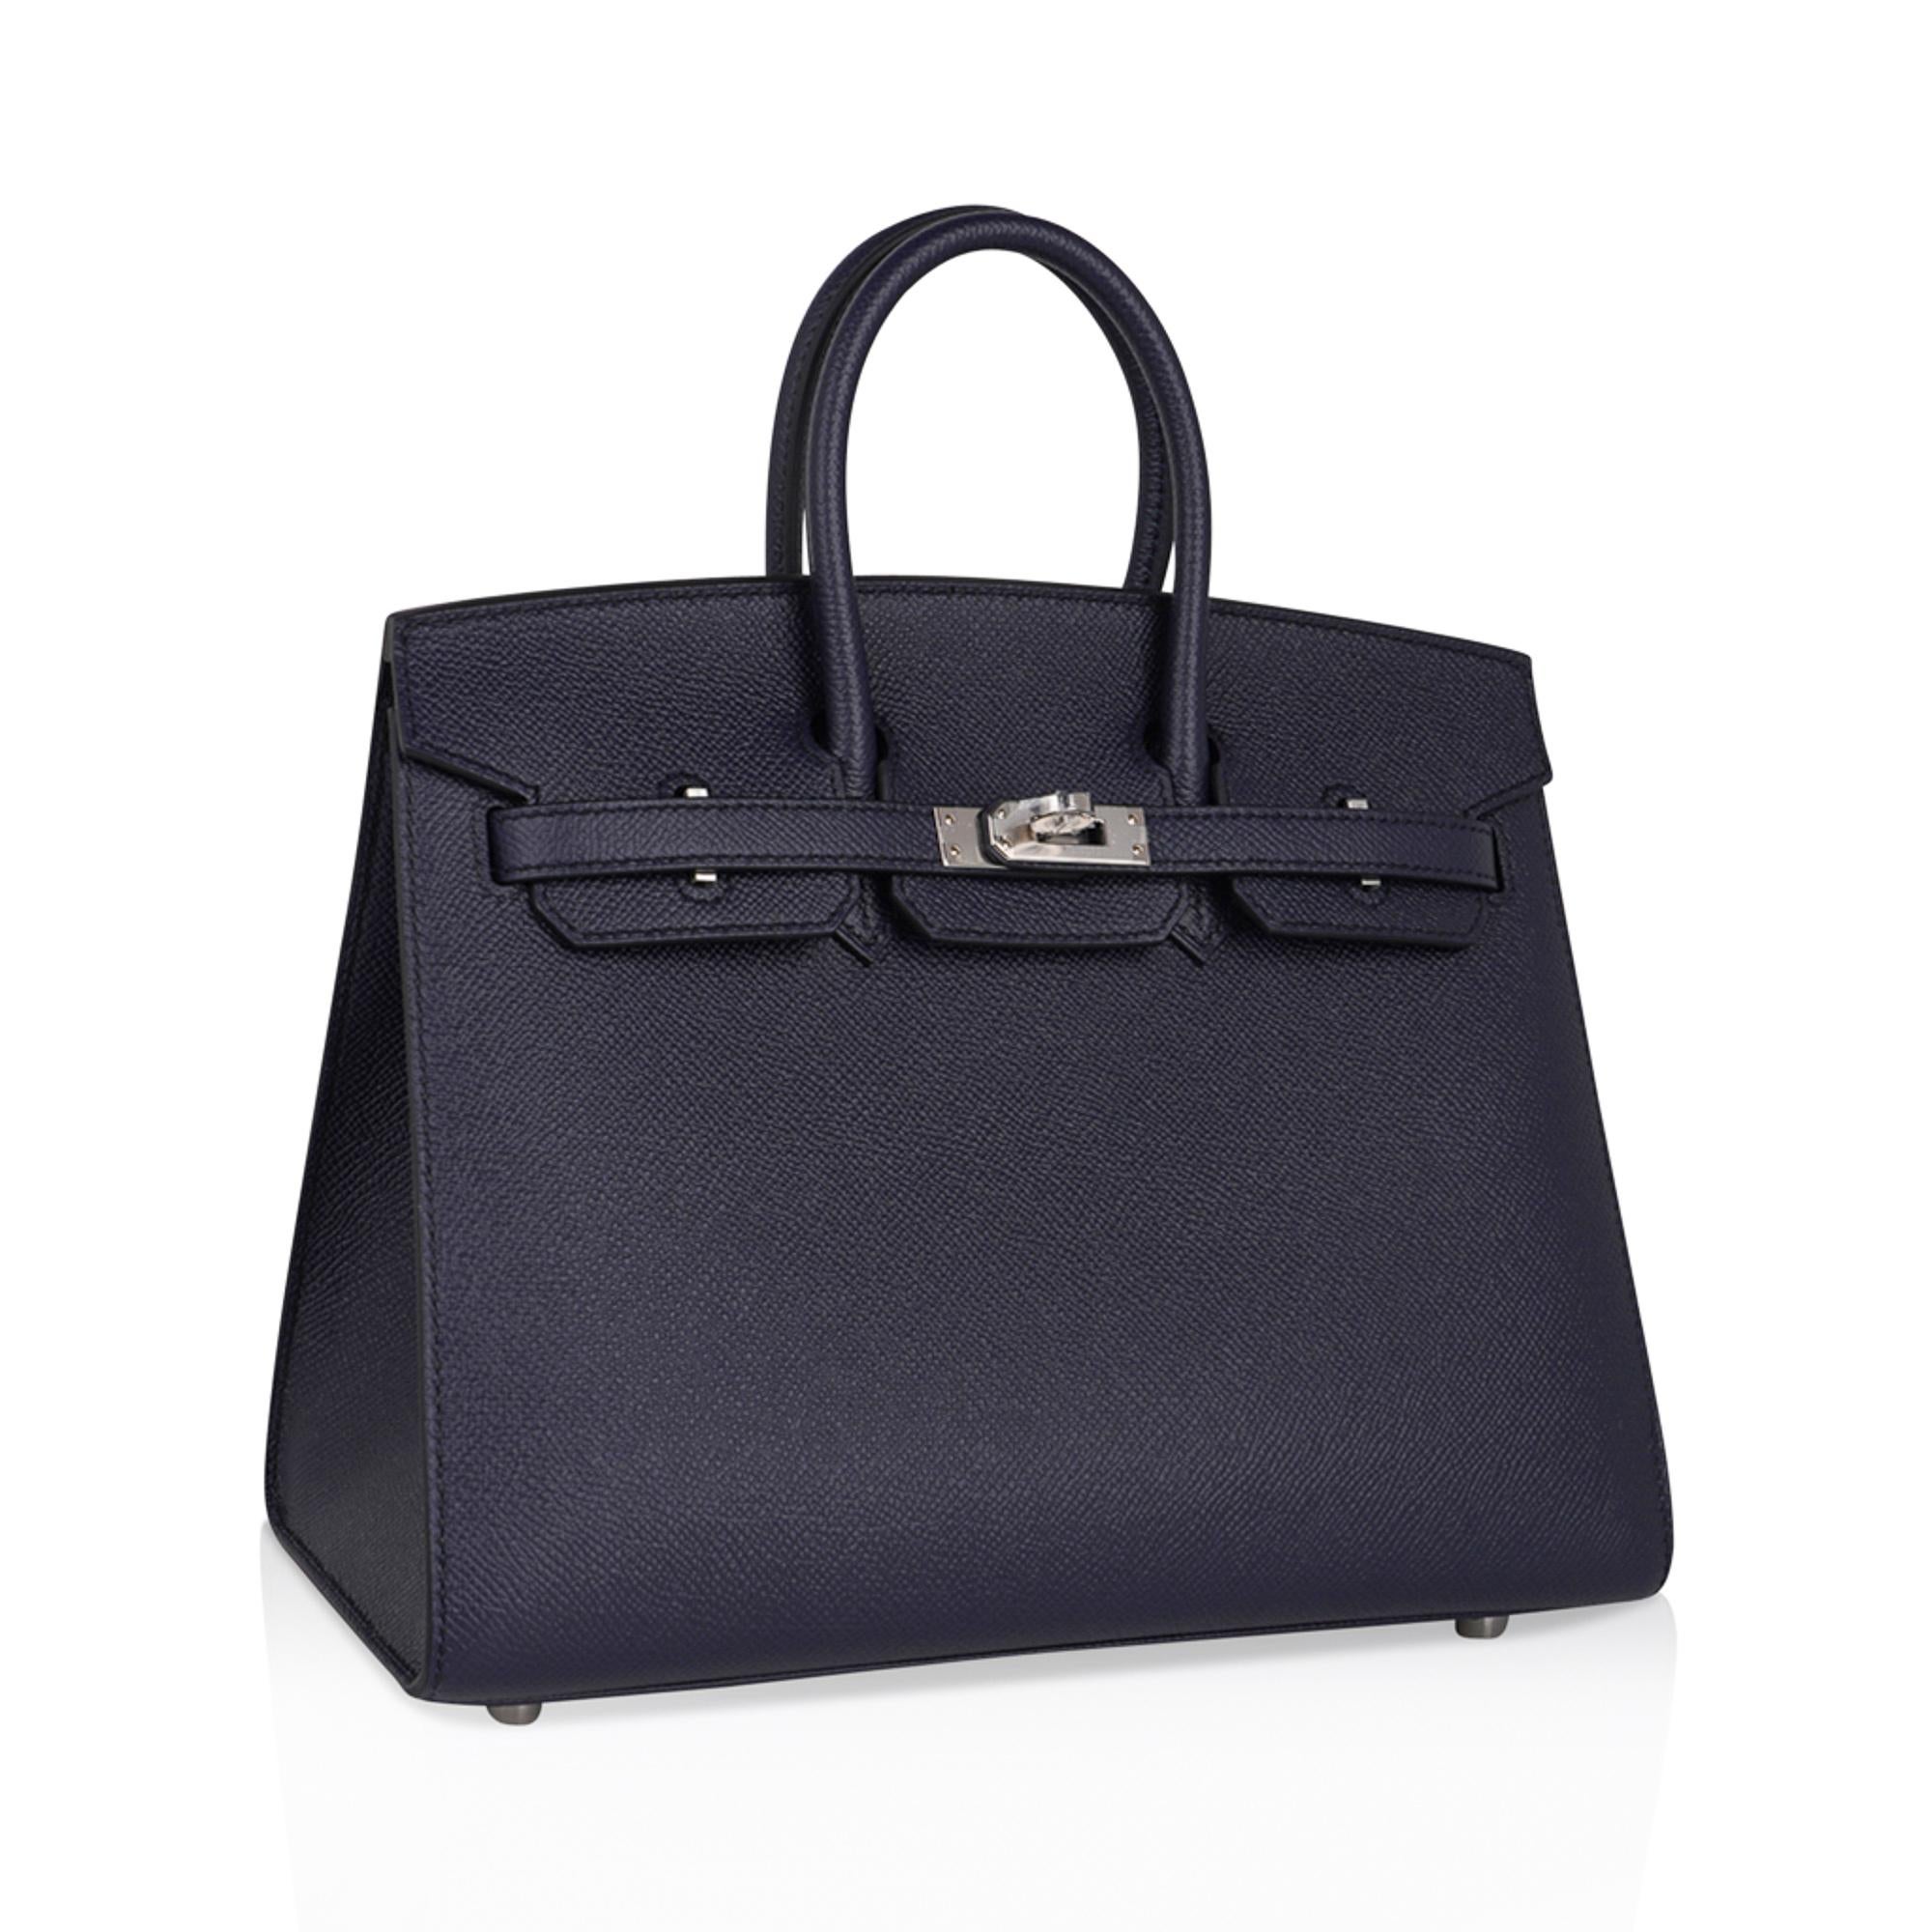 Mightychic offers an Hermes Birkin Sellier 25 bag featured in chic Blue Indigo.
Richly saturated and jewel toned, Hermes Bleu Indigo is gorgeous for year round wear, and completely neutral.
Crips and fresh with Palladium hardware.
This exquisite